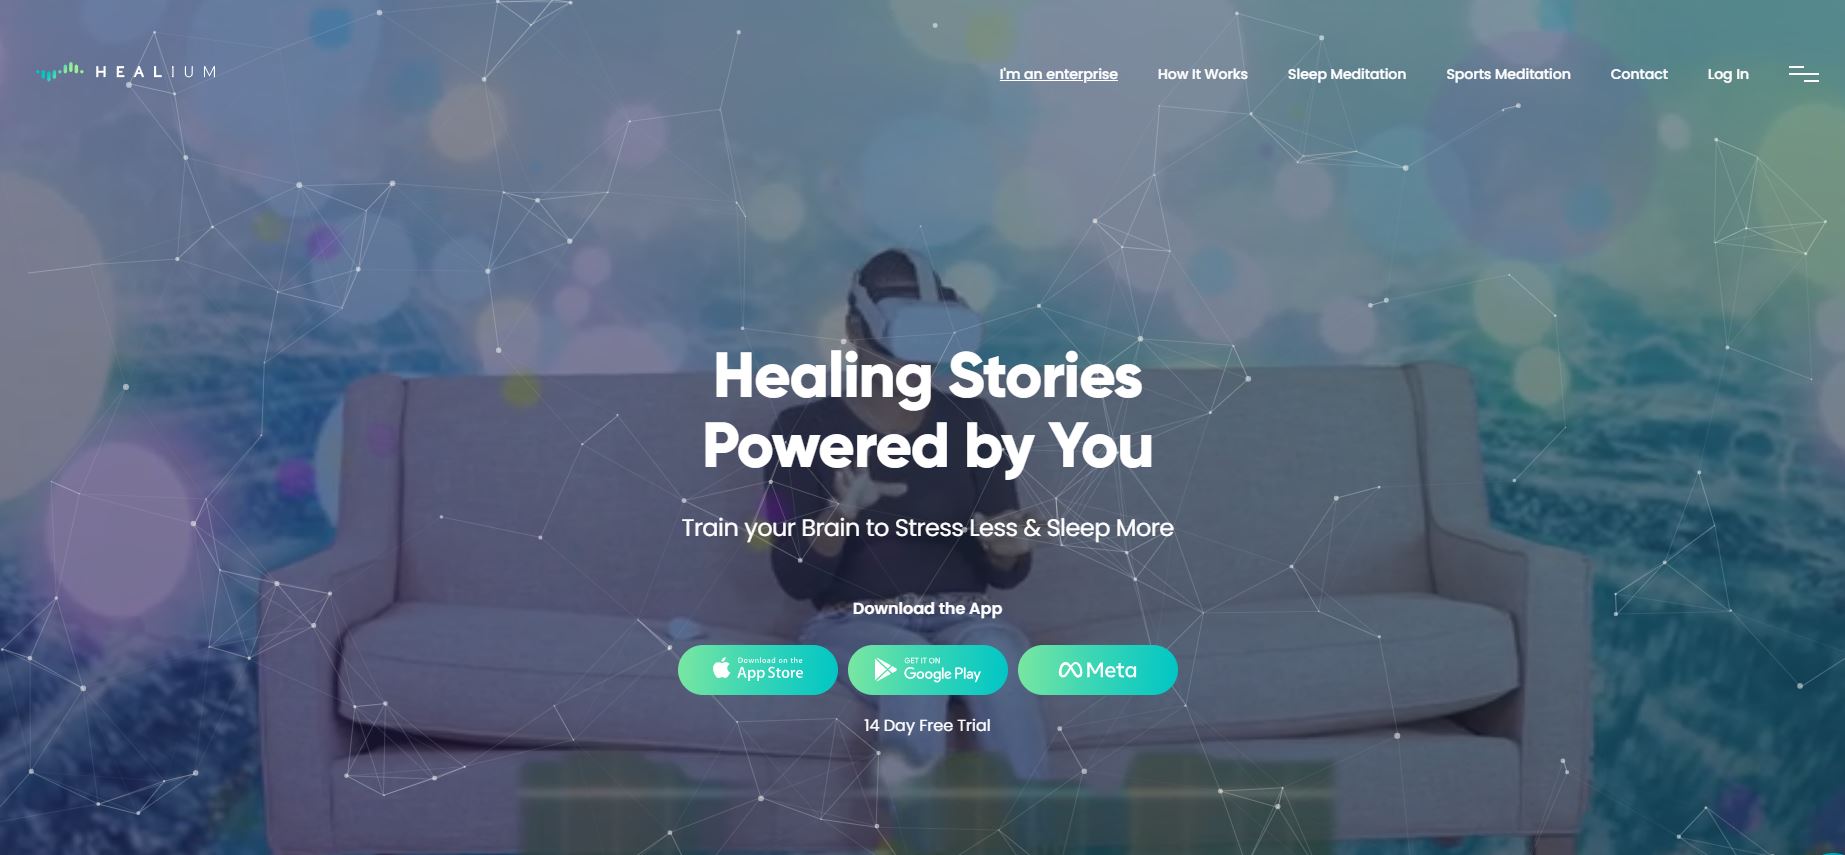 Healium has recently raised $3.6 million in seed funding and is revolutionizing the wellness industry with mental fitness tools